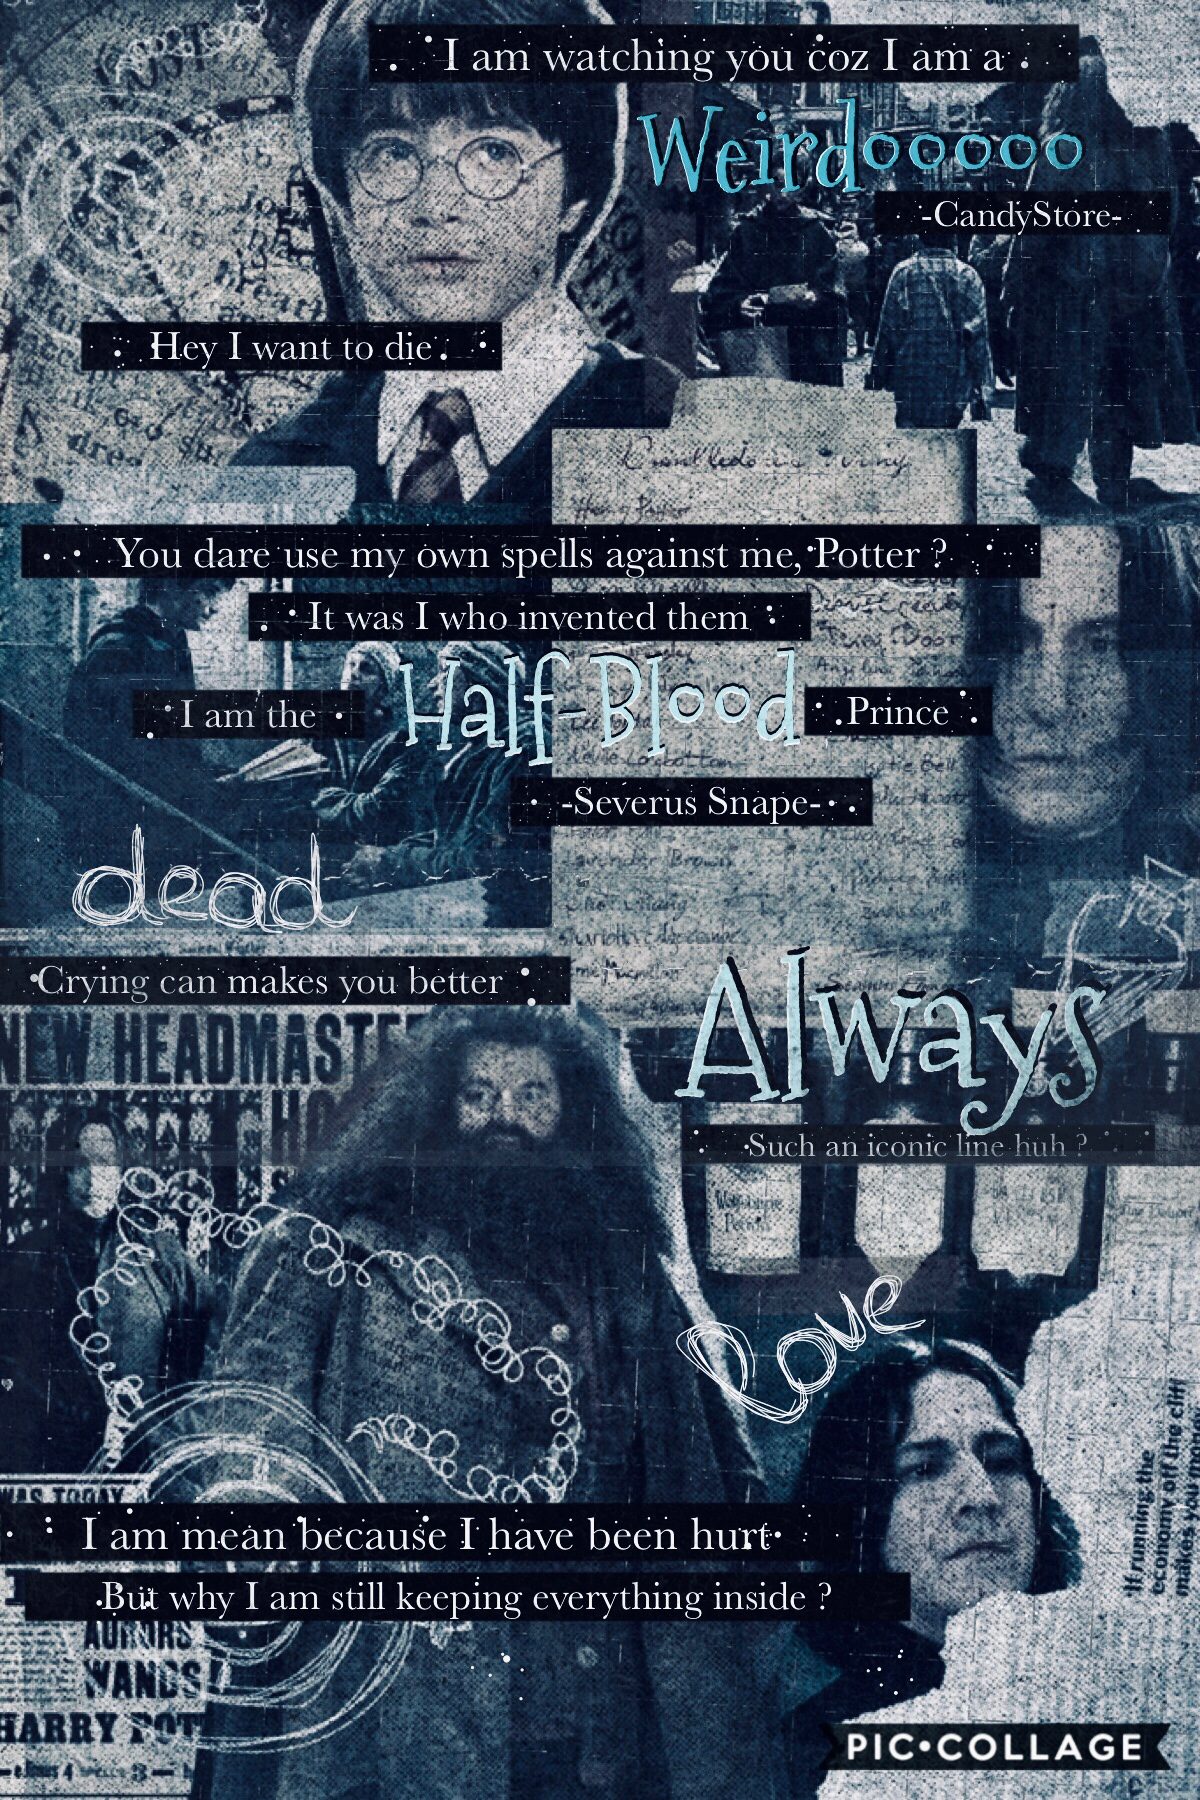 Soooo i had so many others collage of Harry Potter but my little sis did delete all of them « accidentally » 😤😭 so I guess it’s the last one of my theme Harry Potter so what did you think about this style ? I may change it again idk anyone want to collab 